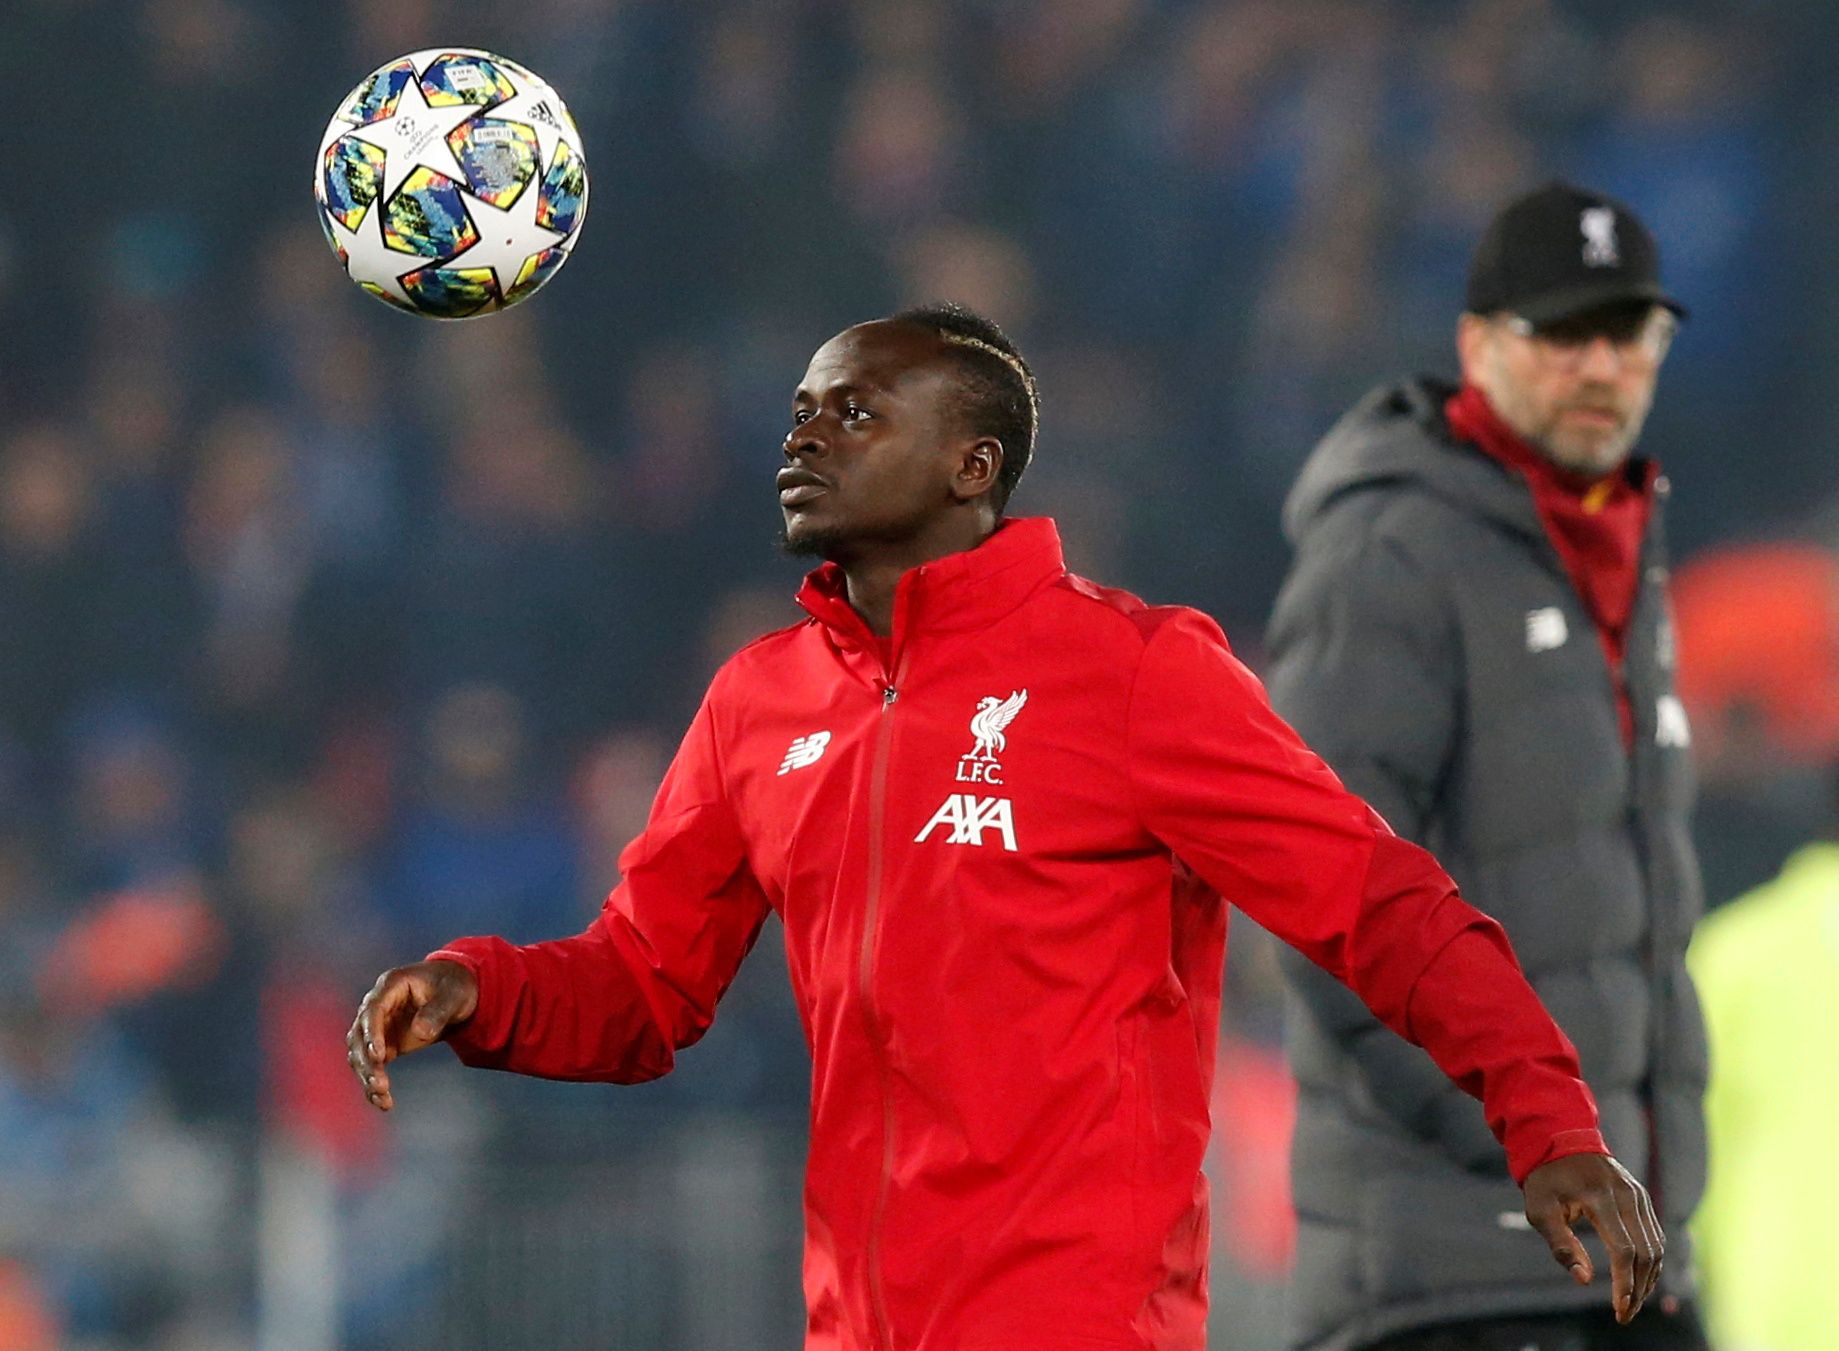 Soccer Football - Champions League - Group E - Liverpool v KRC Genk - Anfield, Liverpool, Britain - November 5, 2019  Liverpool's Sadio Mane and manager Juergen Klopp during the warm up before the match   REUTERS/Andrew Yates